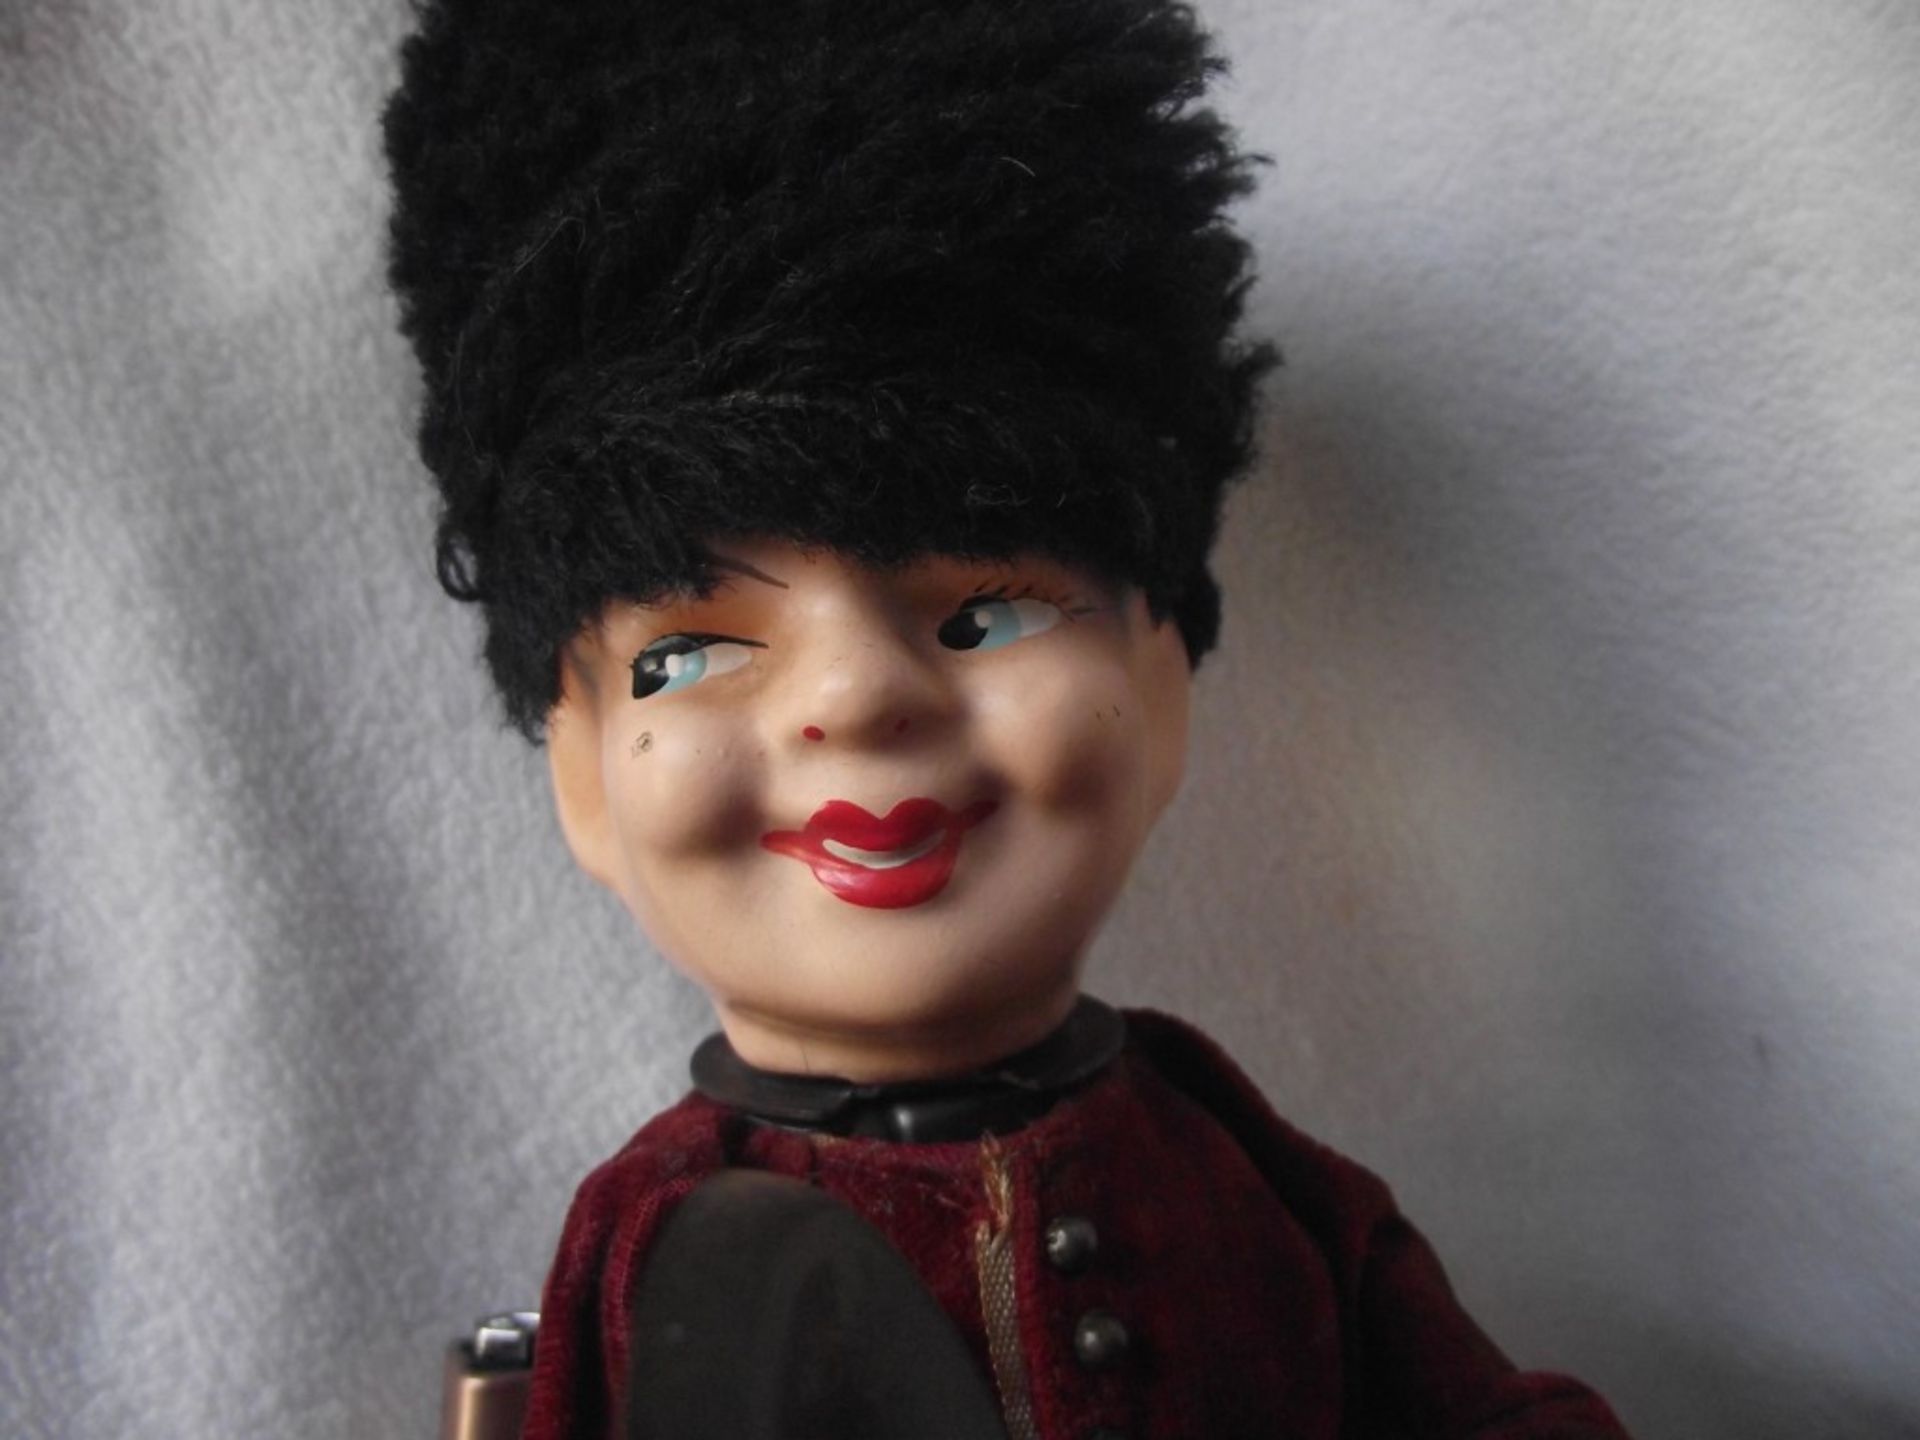 Vintage Clockwork Guardsman Playing Cymbals - Moving Bisque Head -1950's-1960's - Image 18 of 23